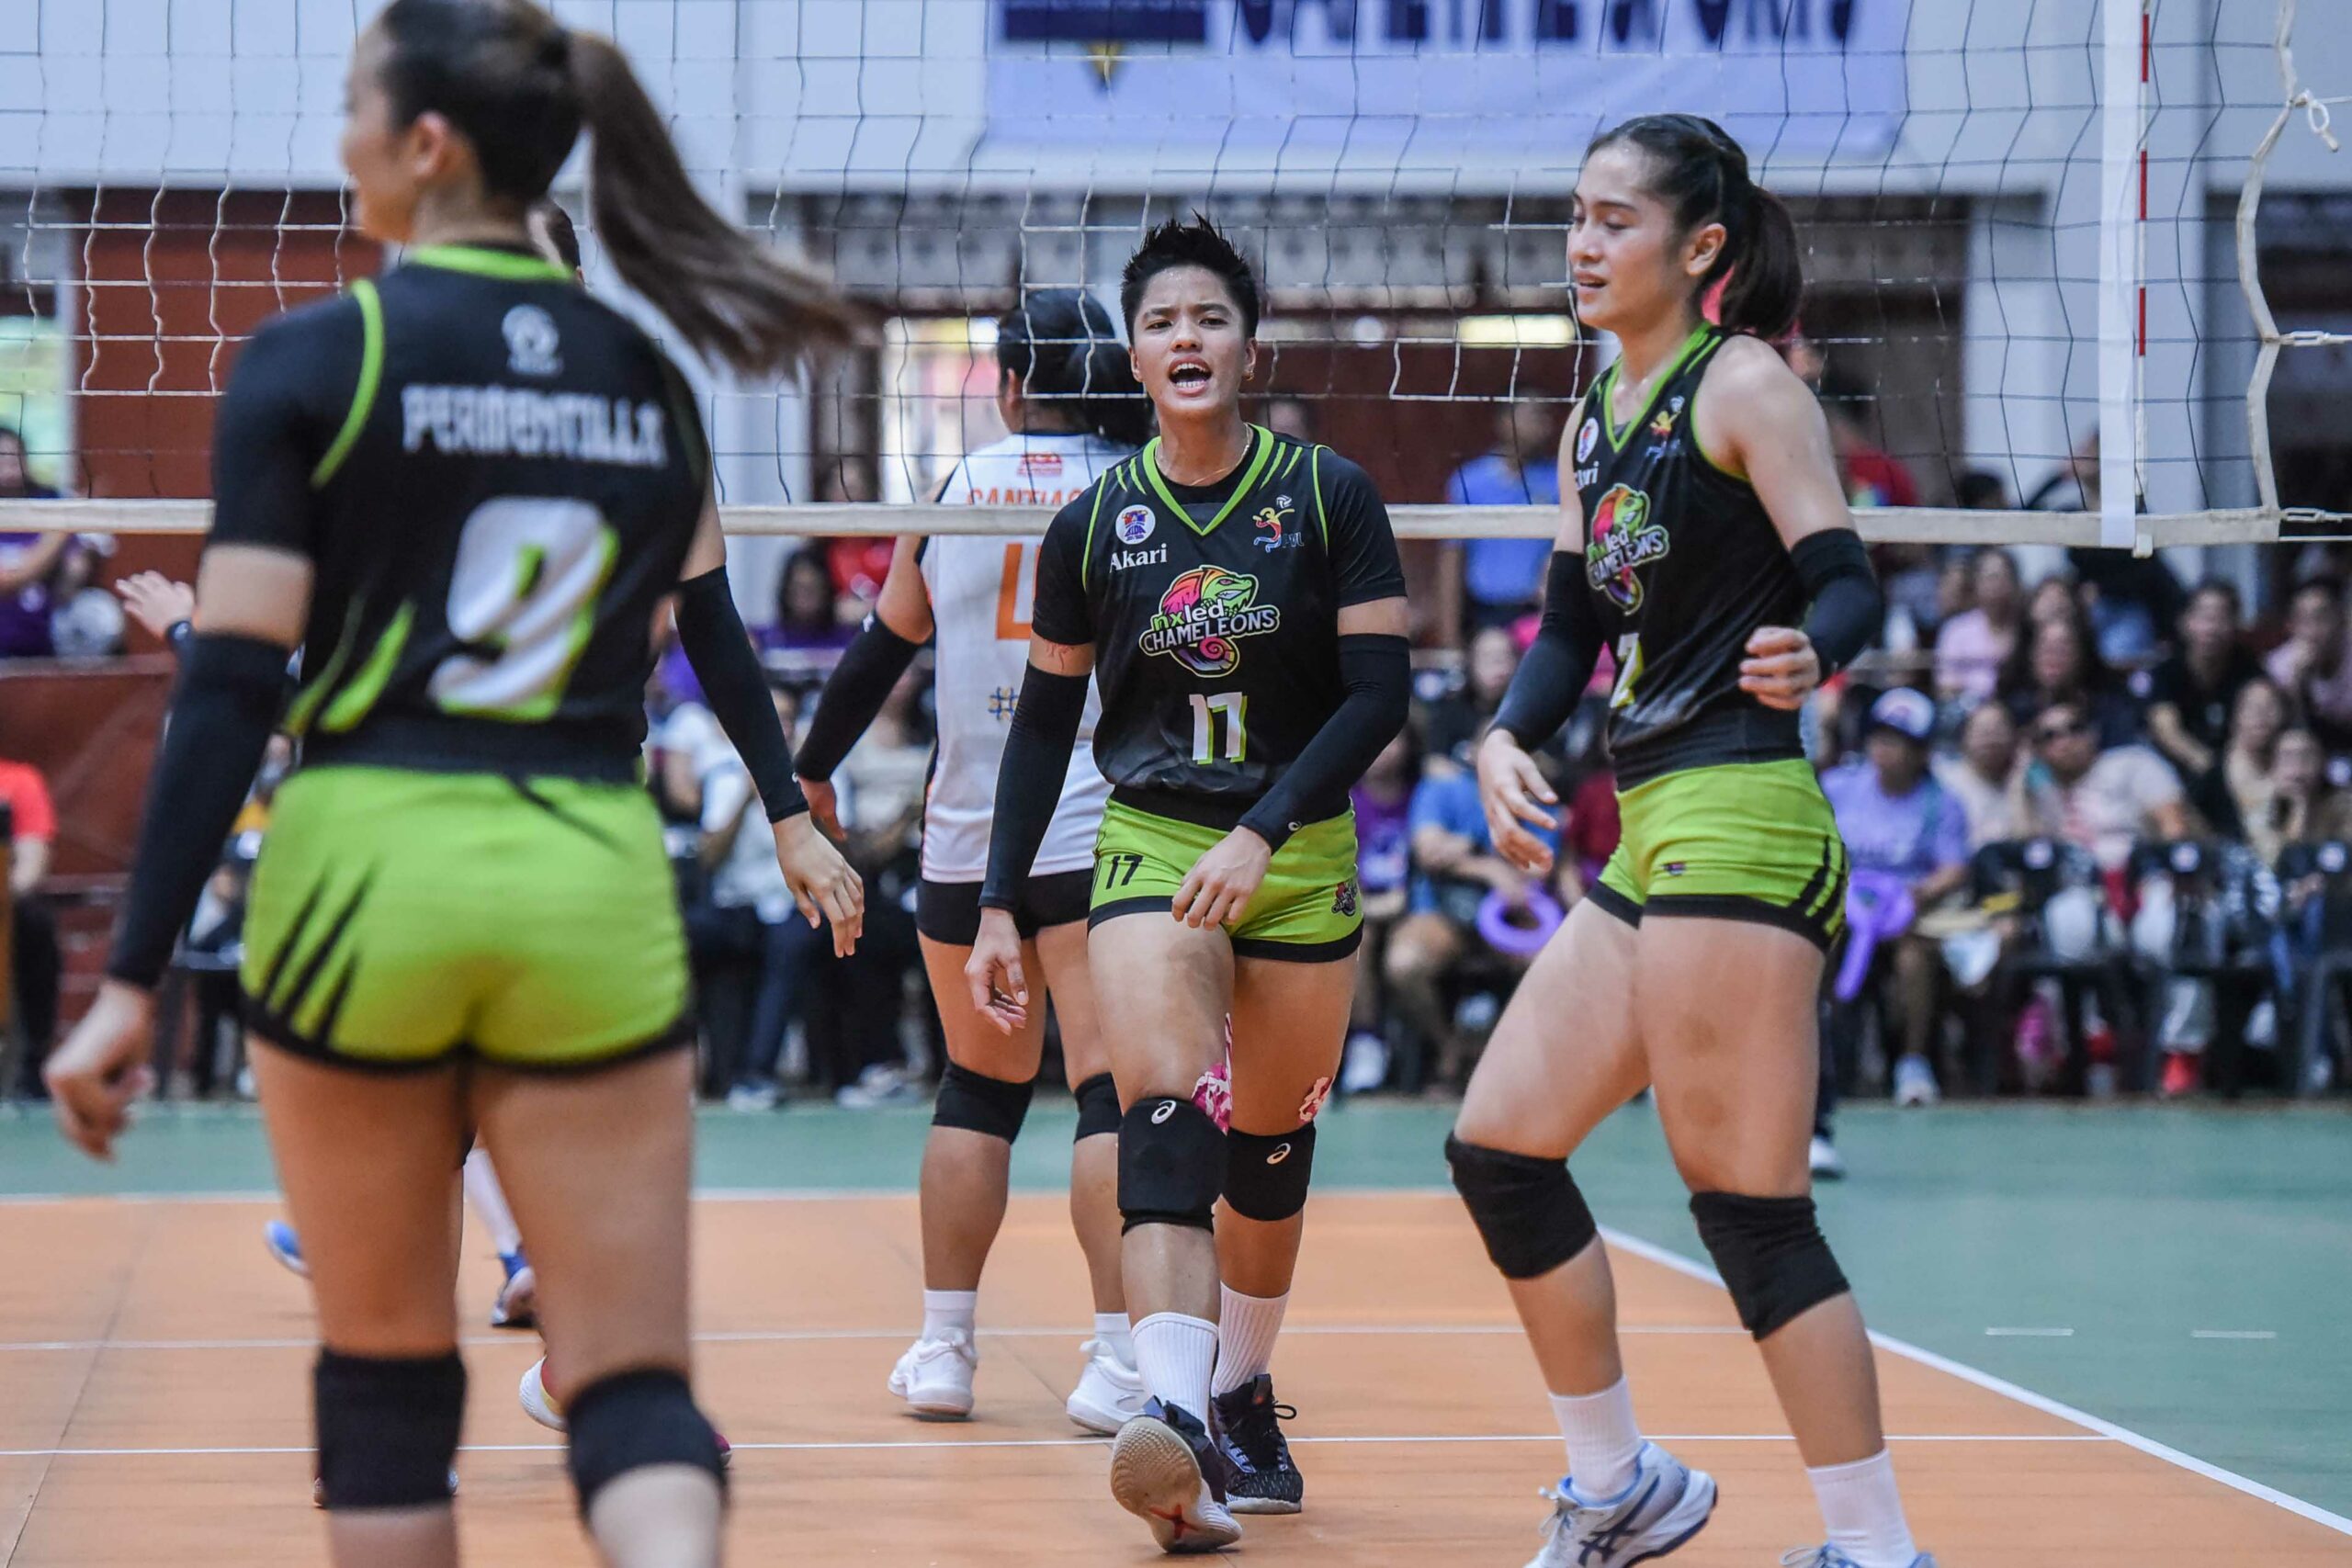 PVL-AFC-Nxled-vs.-Farm-Fresh-Kamille-Cal-7557-scaled Nxled's first conference run exceeded Minowa's expectations News PVL Volleyball  - philippine sports news